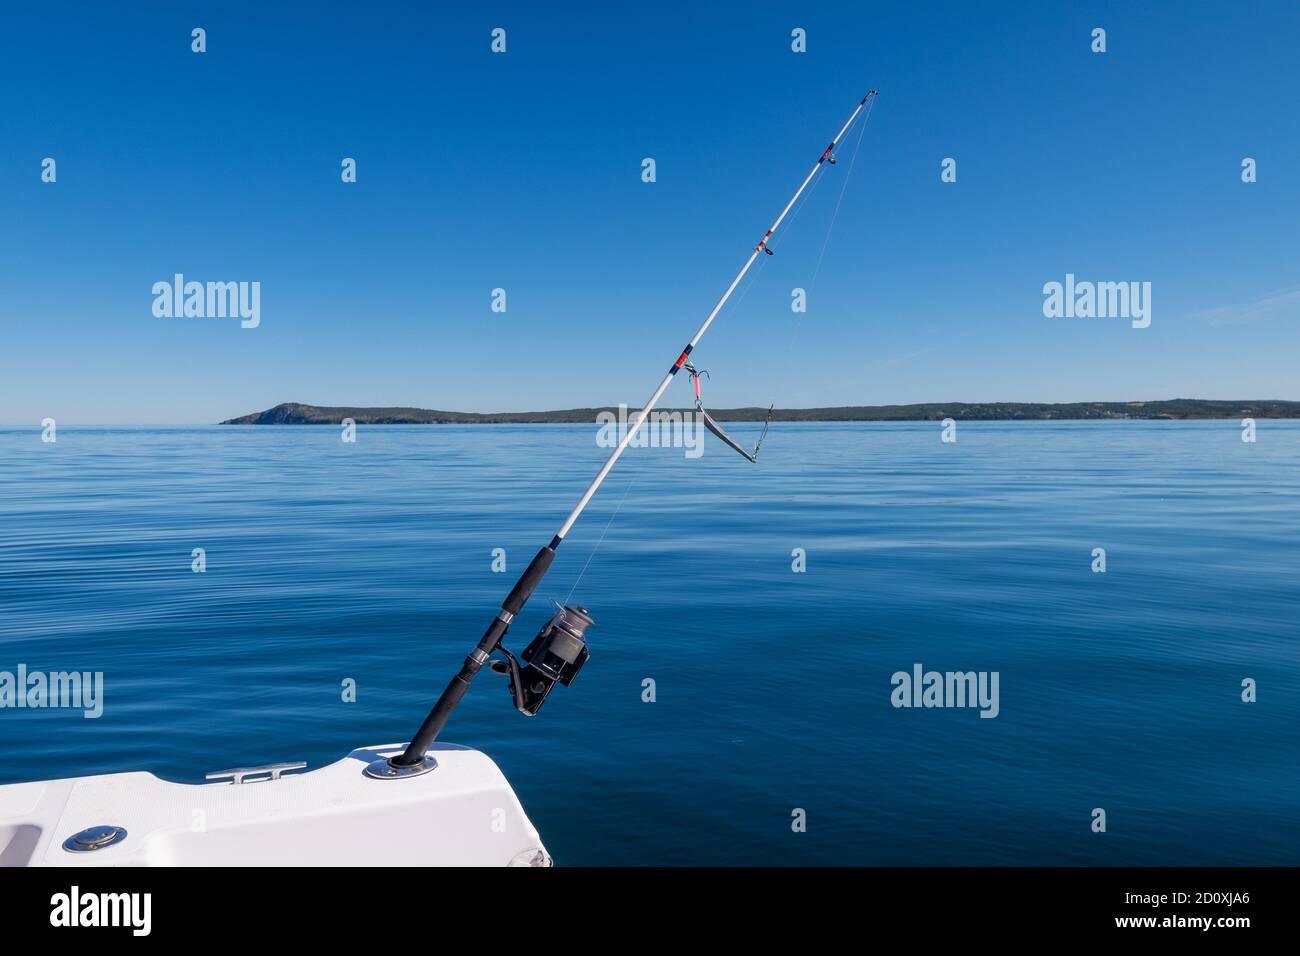 Clear beautiful calm ocean with a landmass in the background. The sky is bright blue. Stock Photo